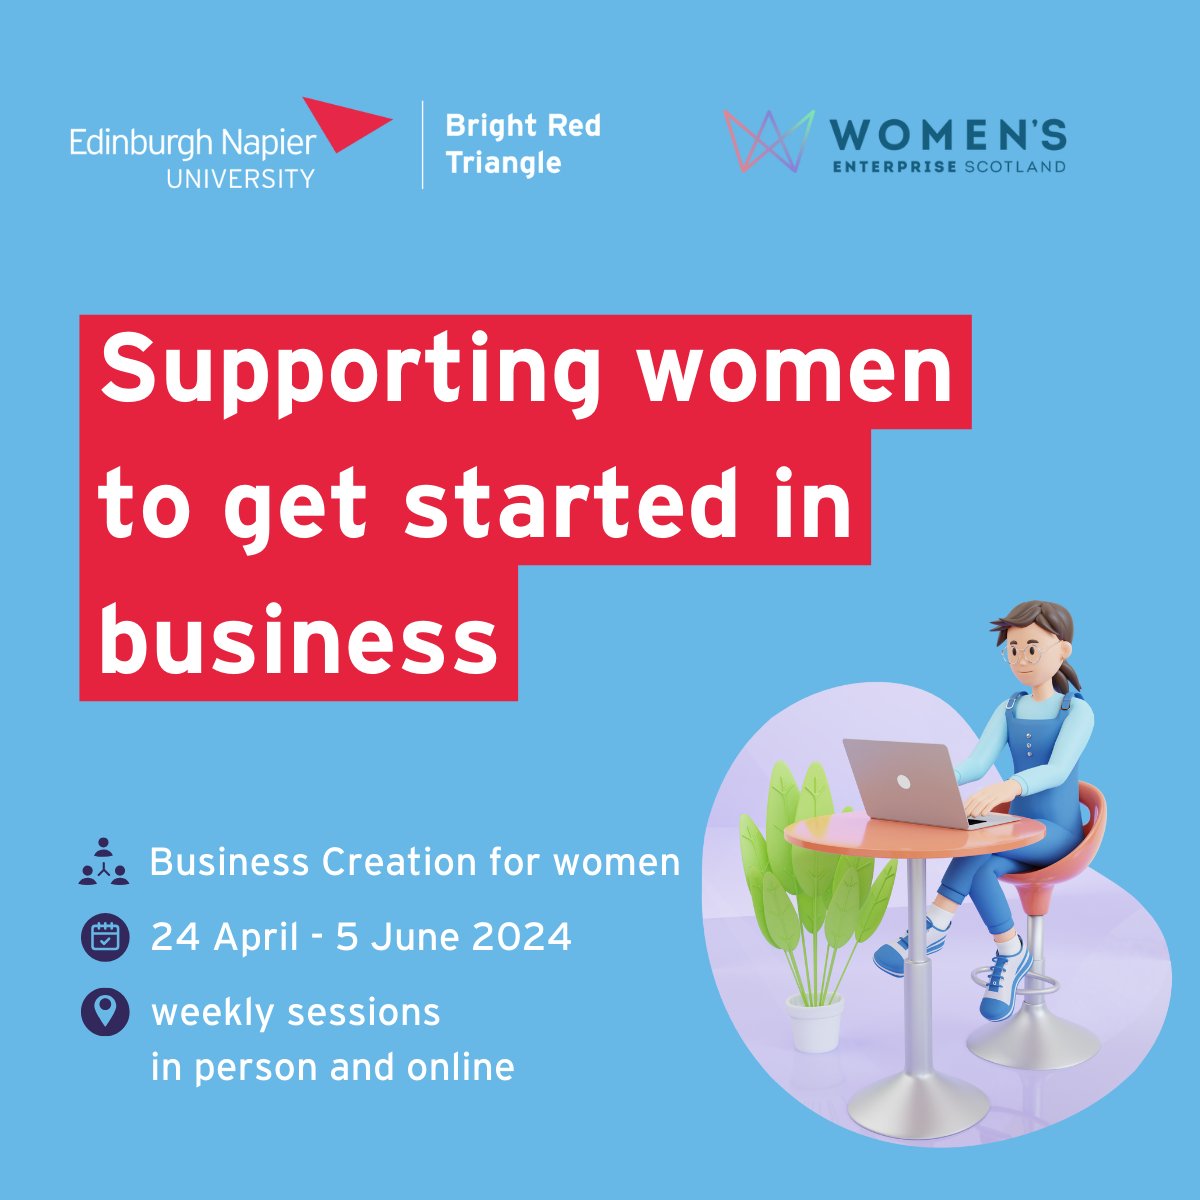 We are leaping into spring with new courses supporting #women in enterprise. From those contemplating #StartUp to those looking to develop their #Leadership skills - we have something for you.